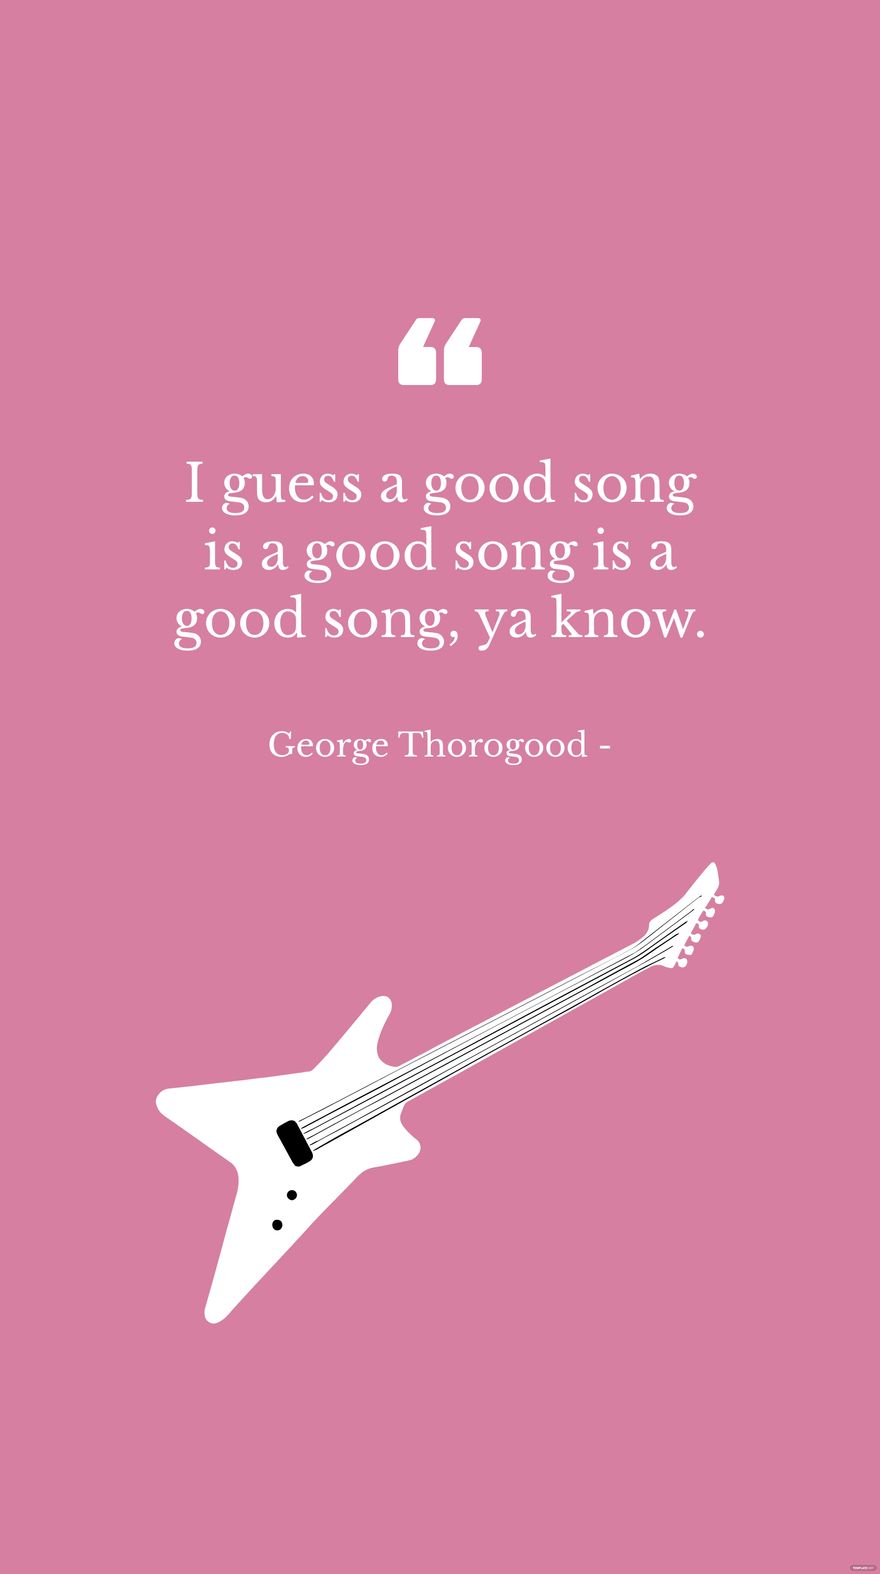 George Thorogood - I guess a good song is a good song is a good song, ya know.